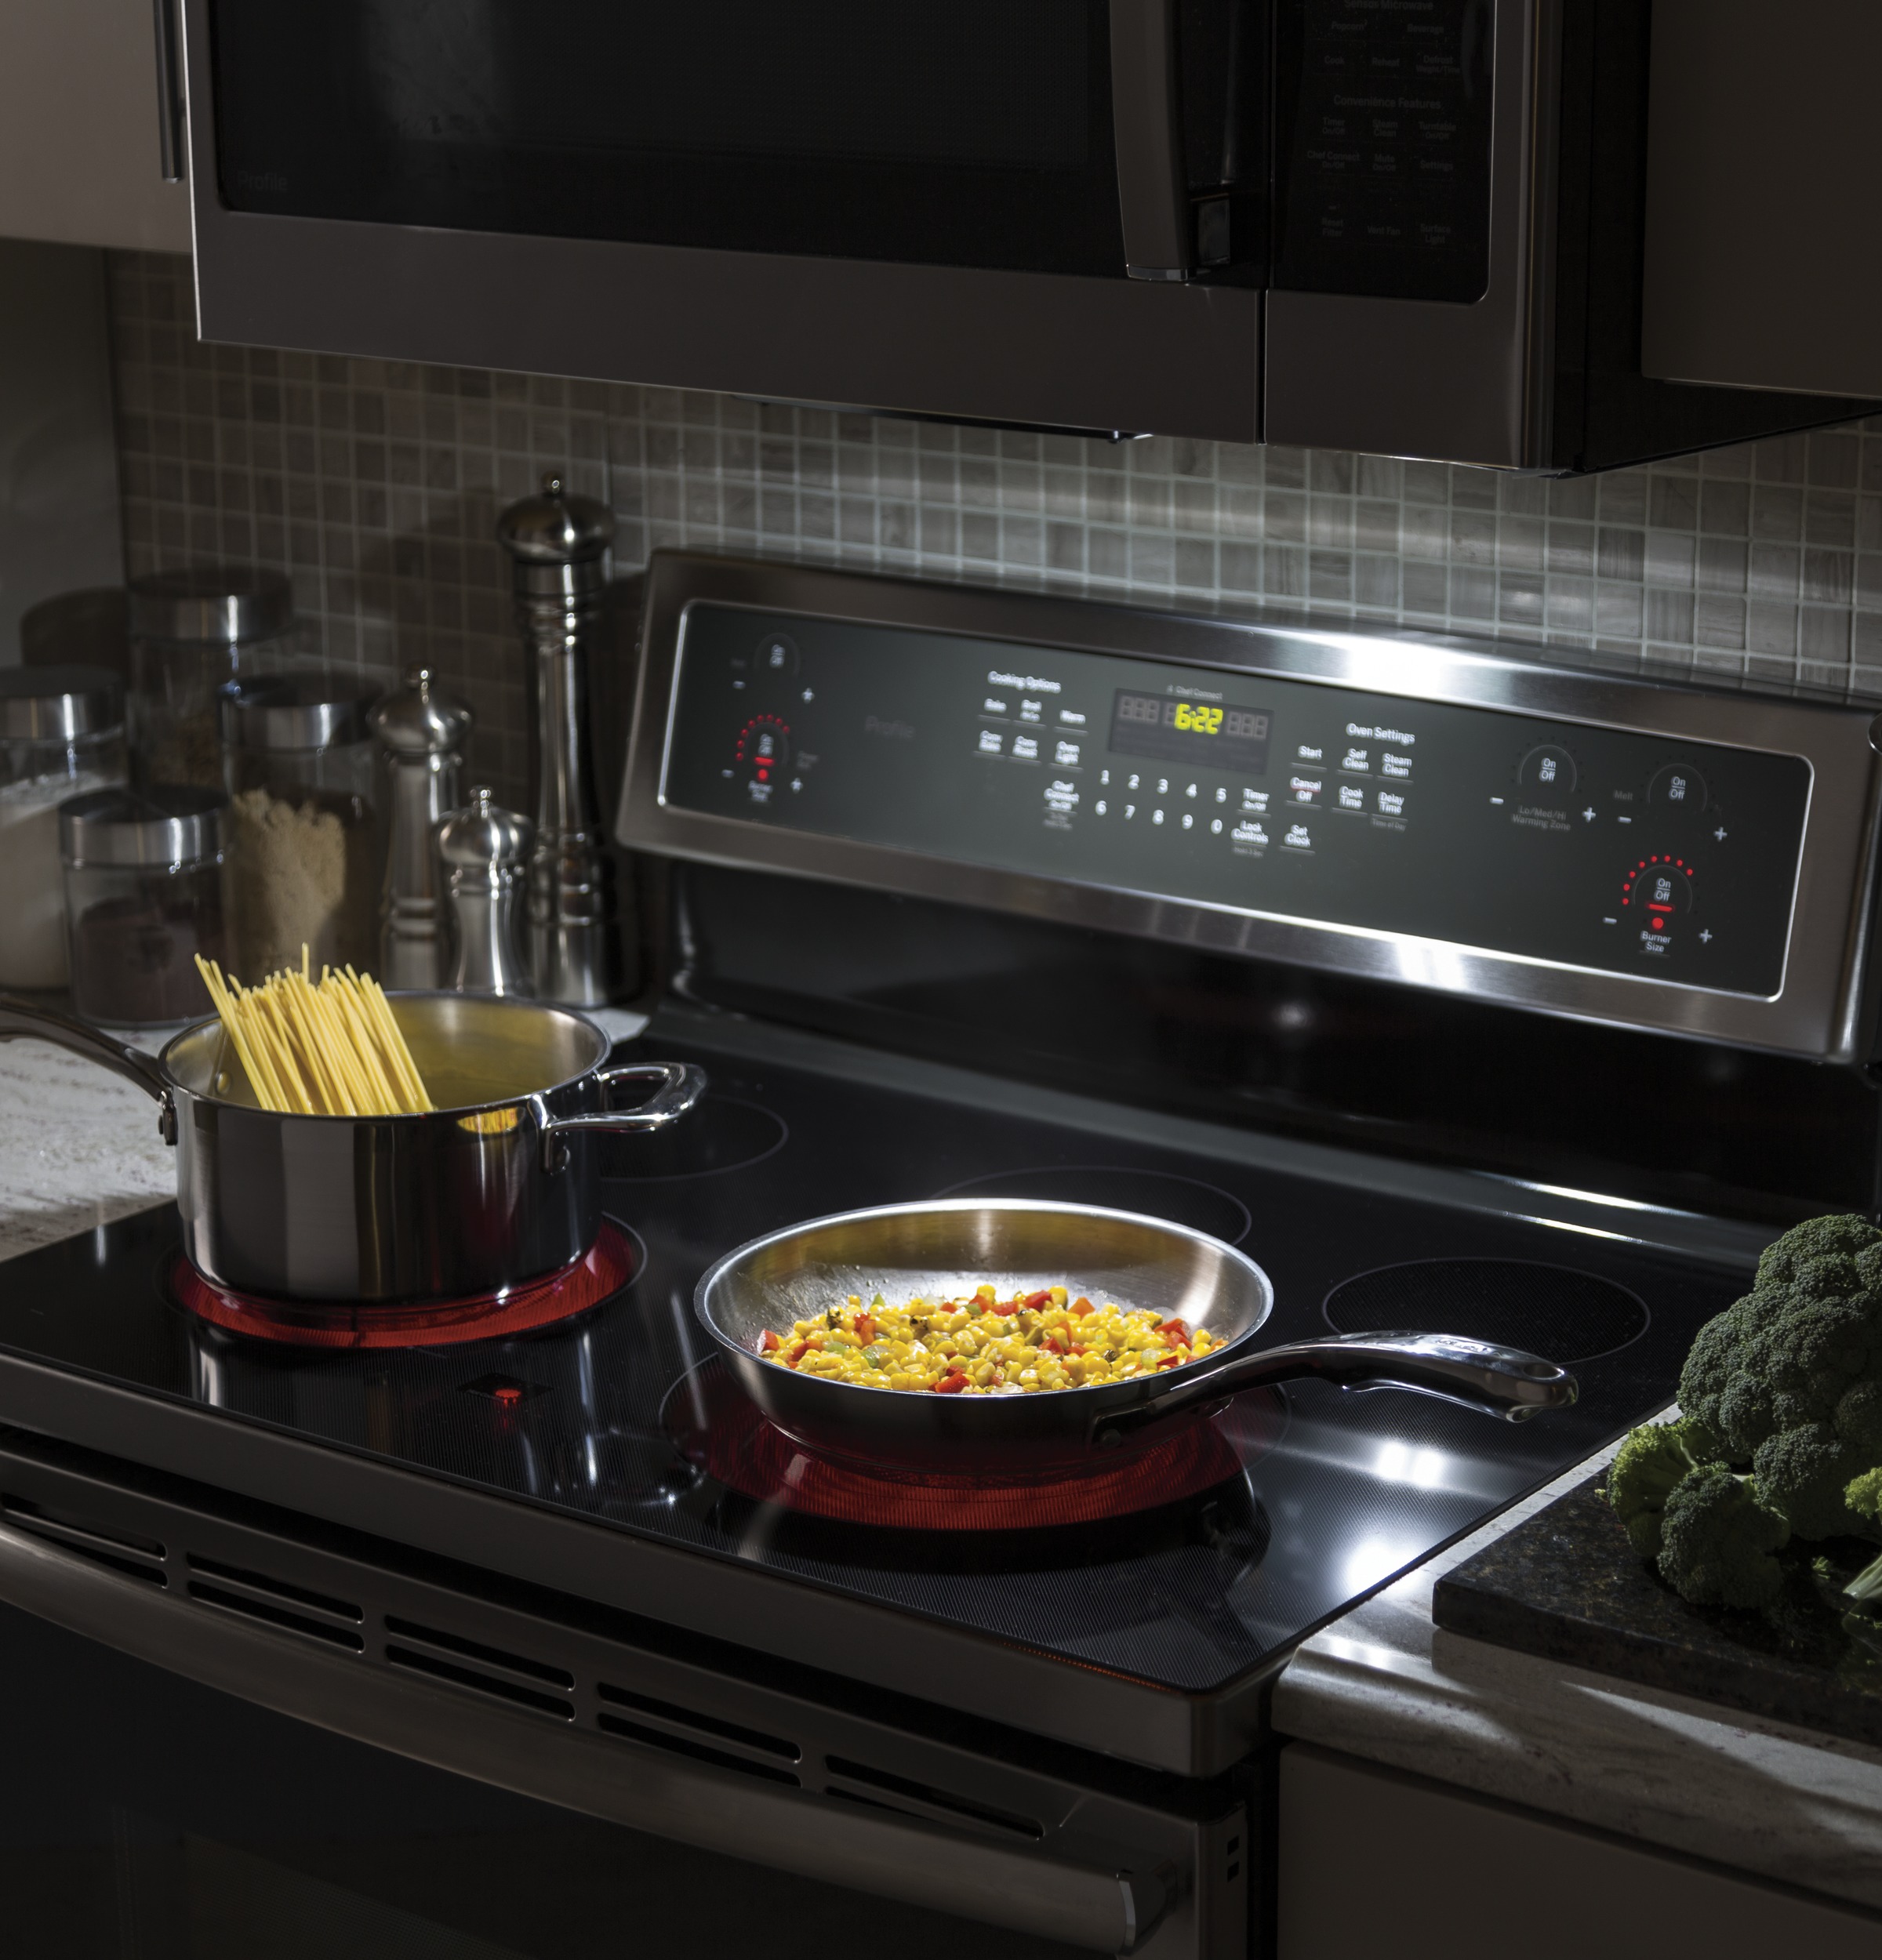 Model: PVM9179BLTS | GE Profile GE Profile™ 1.7 Cu. Ft. Convection Over-the-Range Microwave Oven